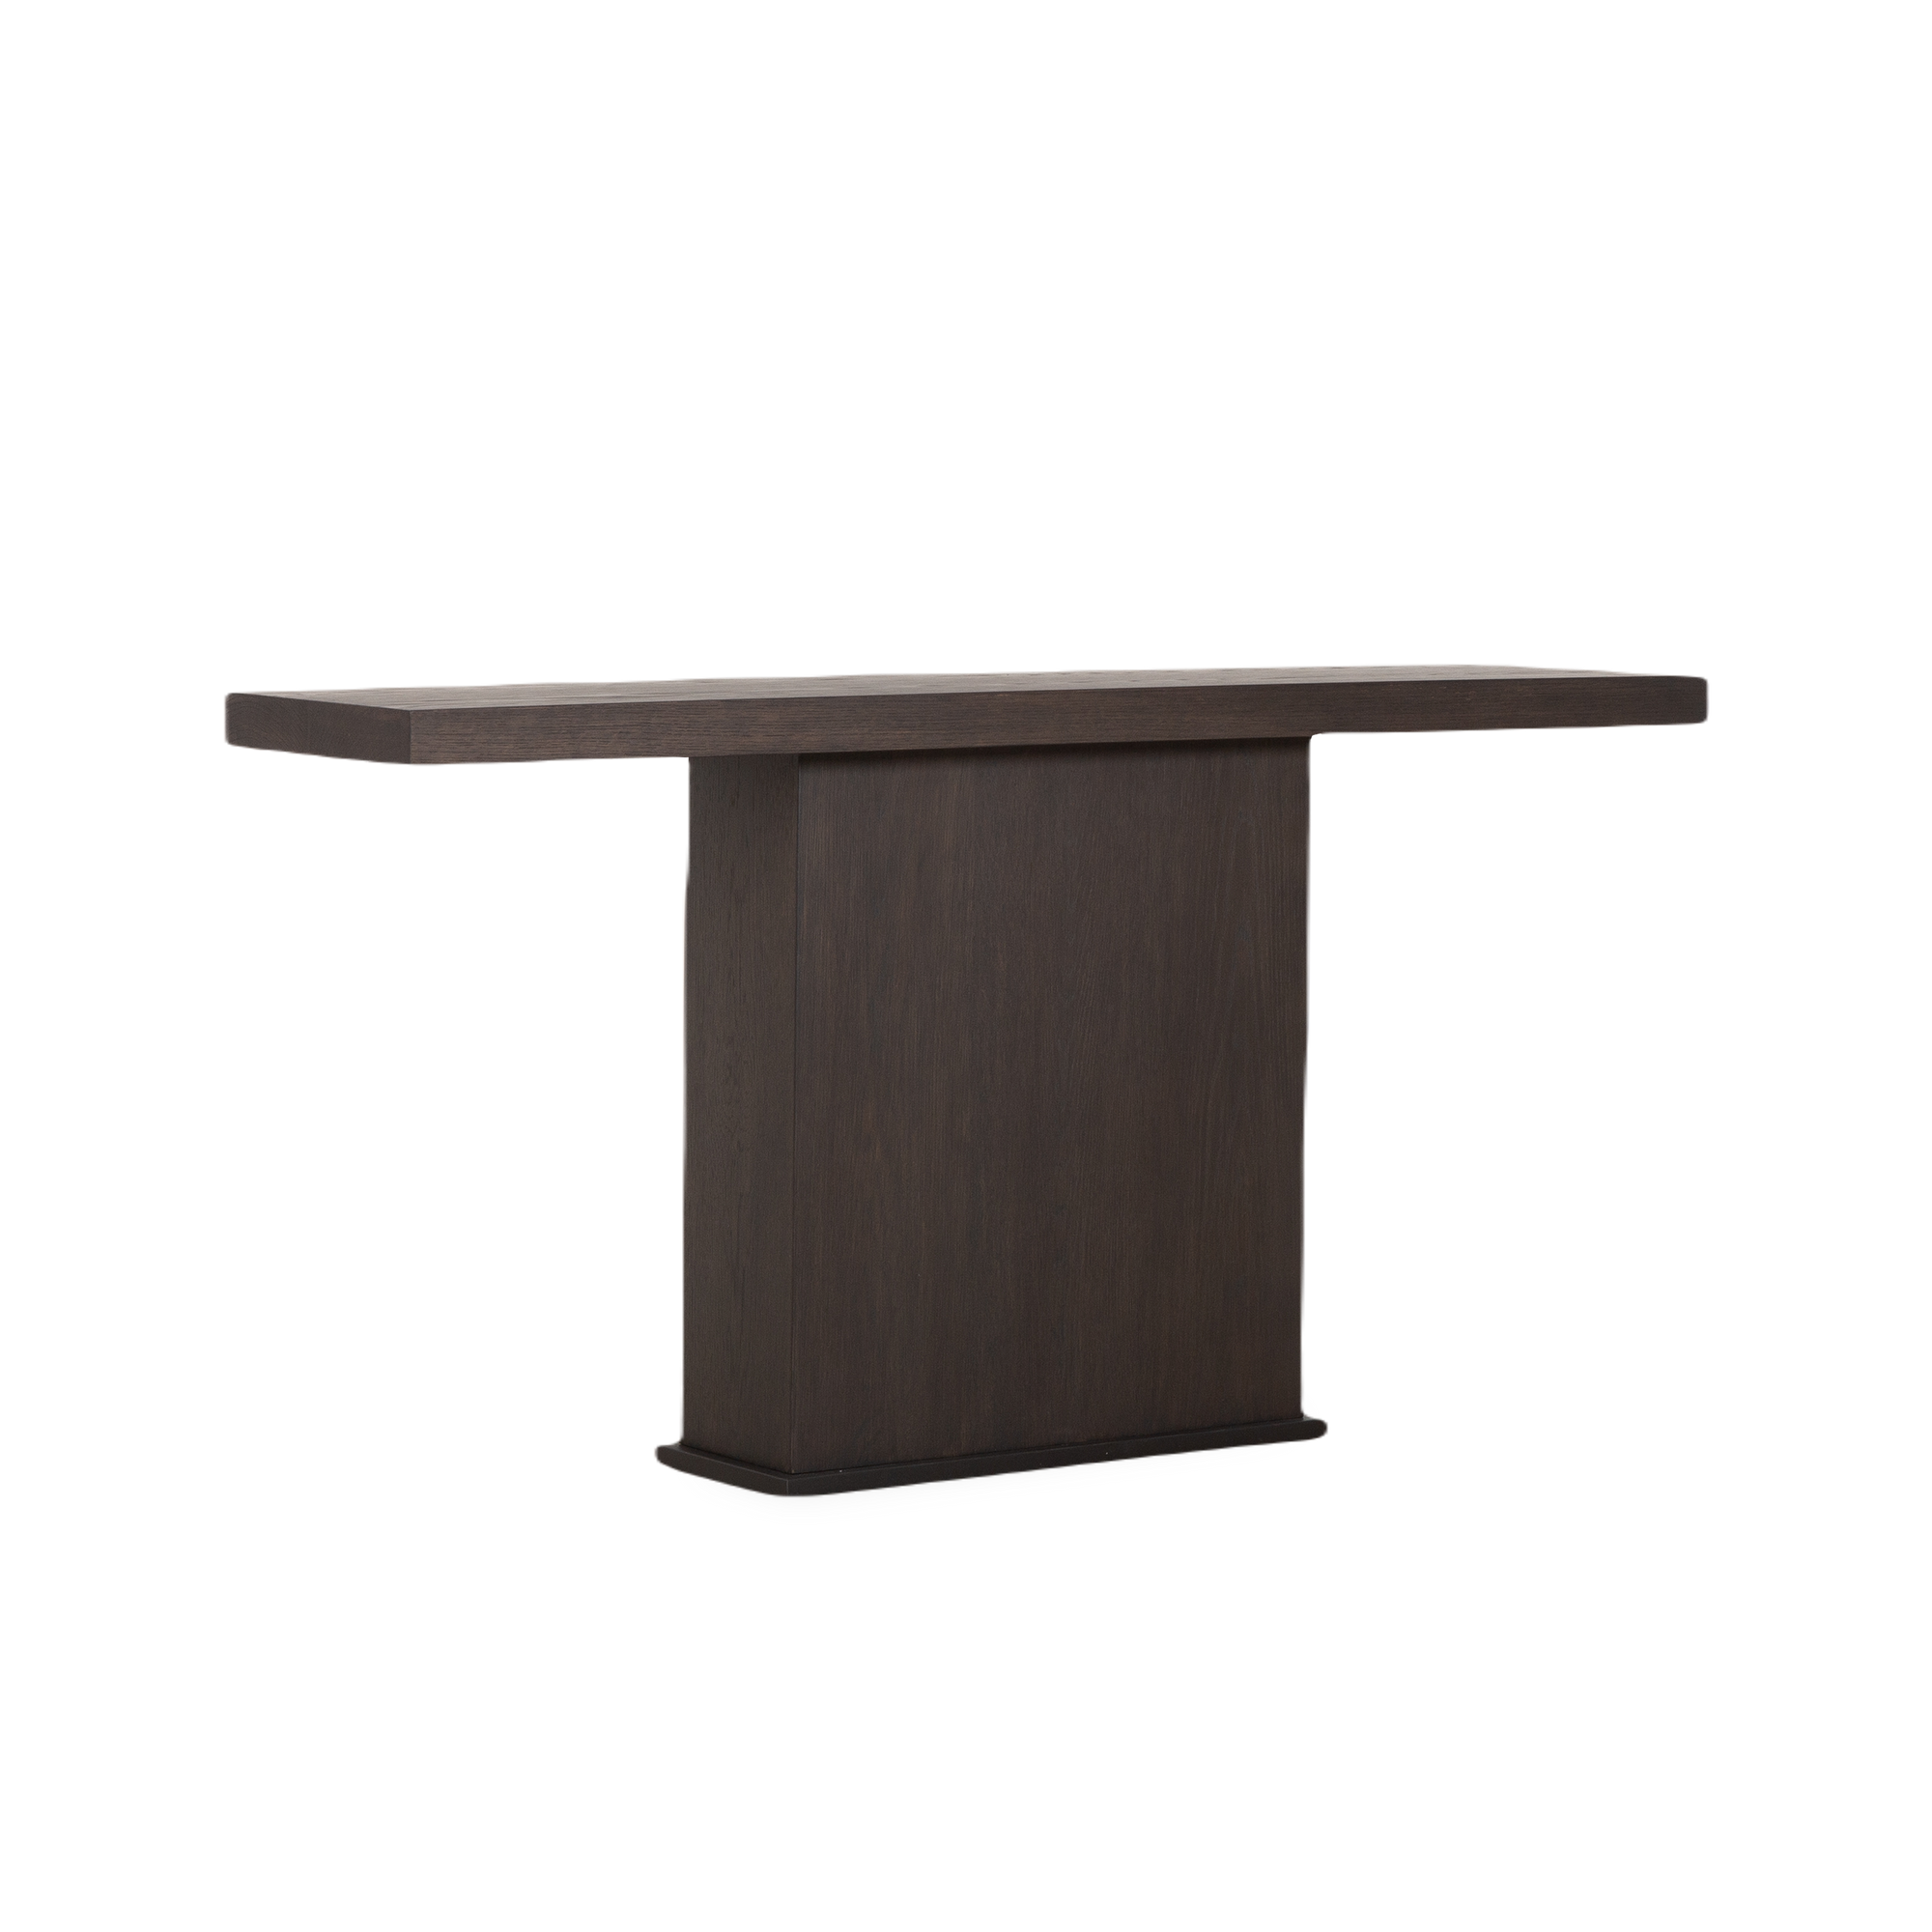 With bold, rectilinear lines and strong proportions, the Altar Console Table is a celebration of the timeless beauty of pure geometry.